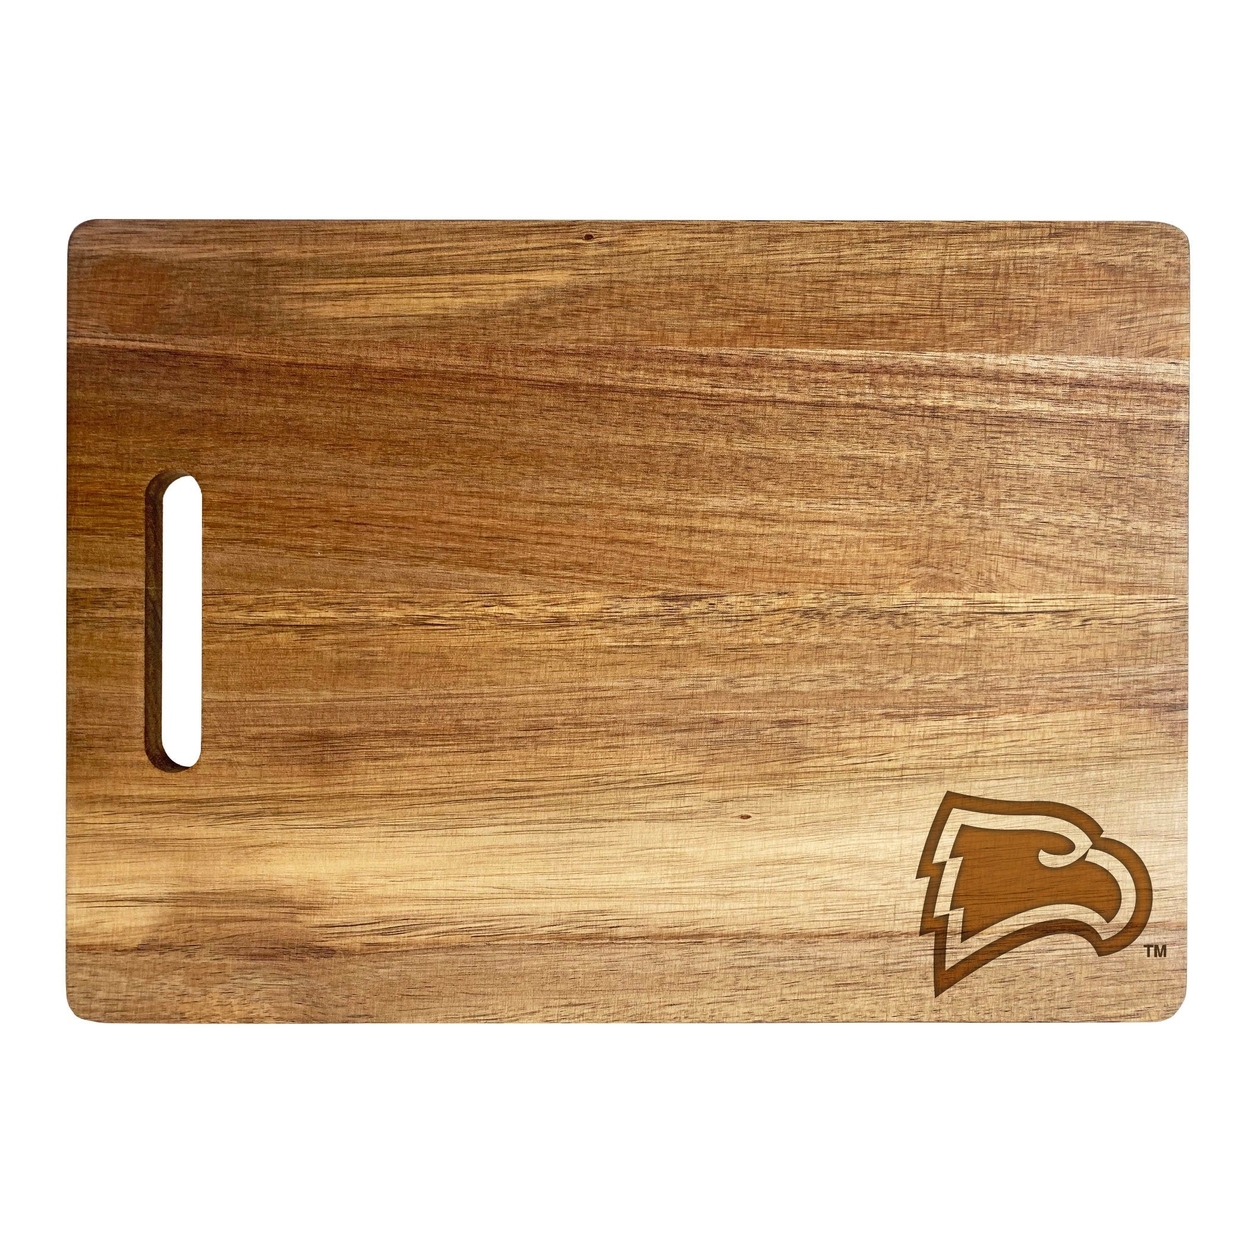 Winthrop University Engraved Wooden Cutting Board 10 X 14 Acacia Wood - Small Engraving